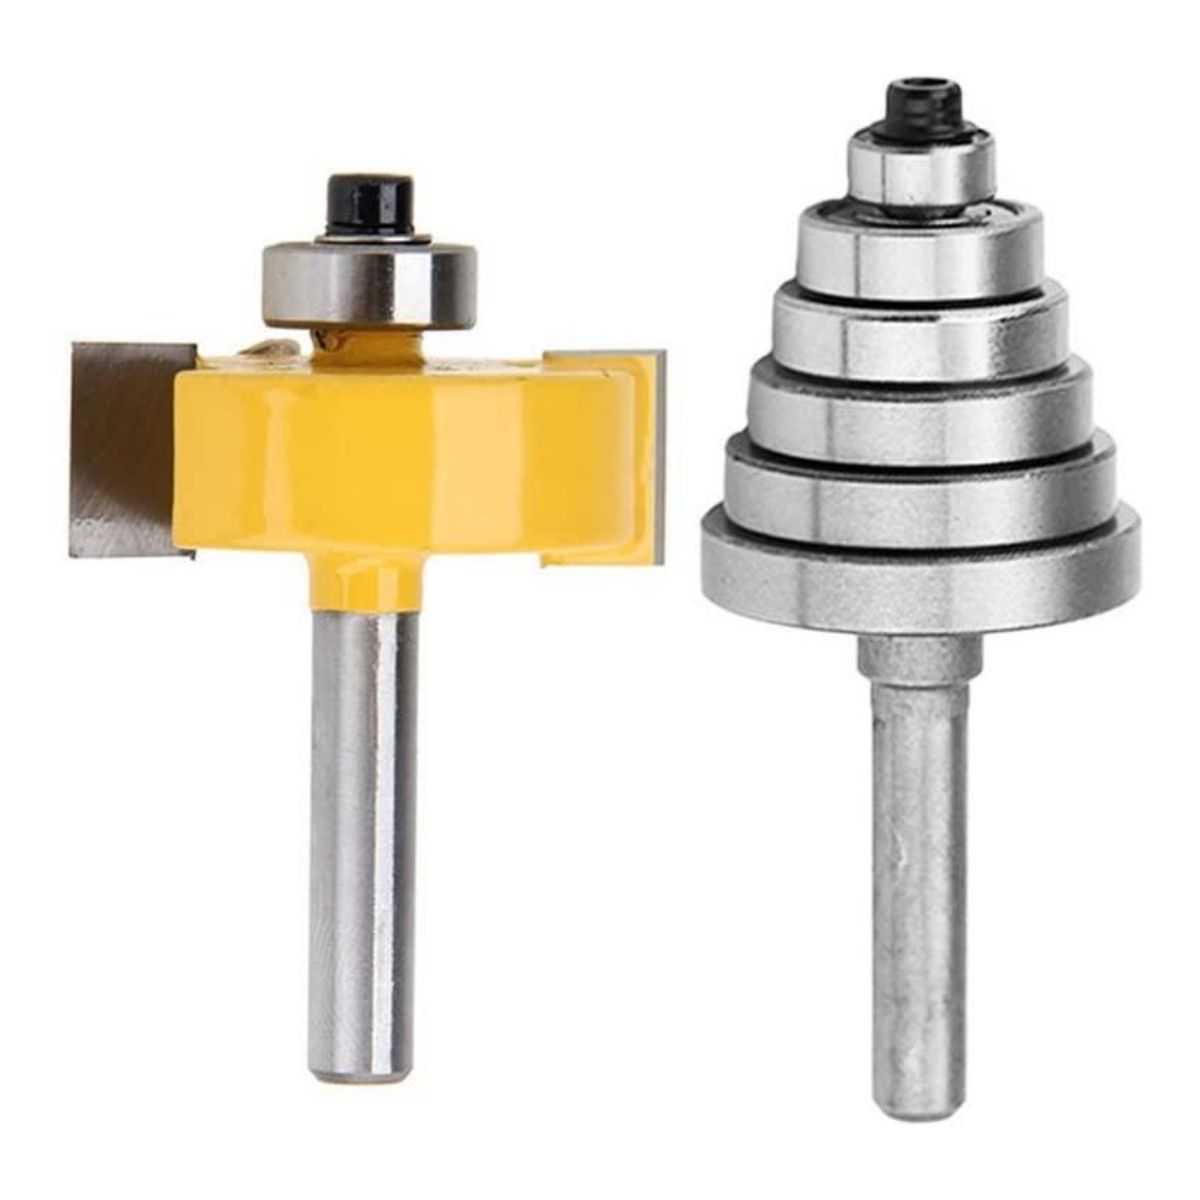 The Router Bit Types Option: Rabbeting